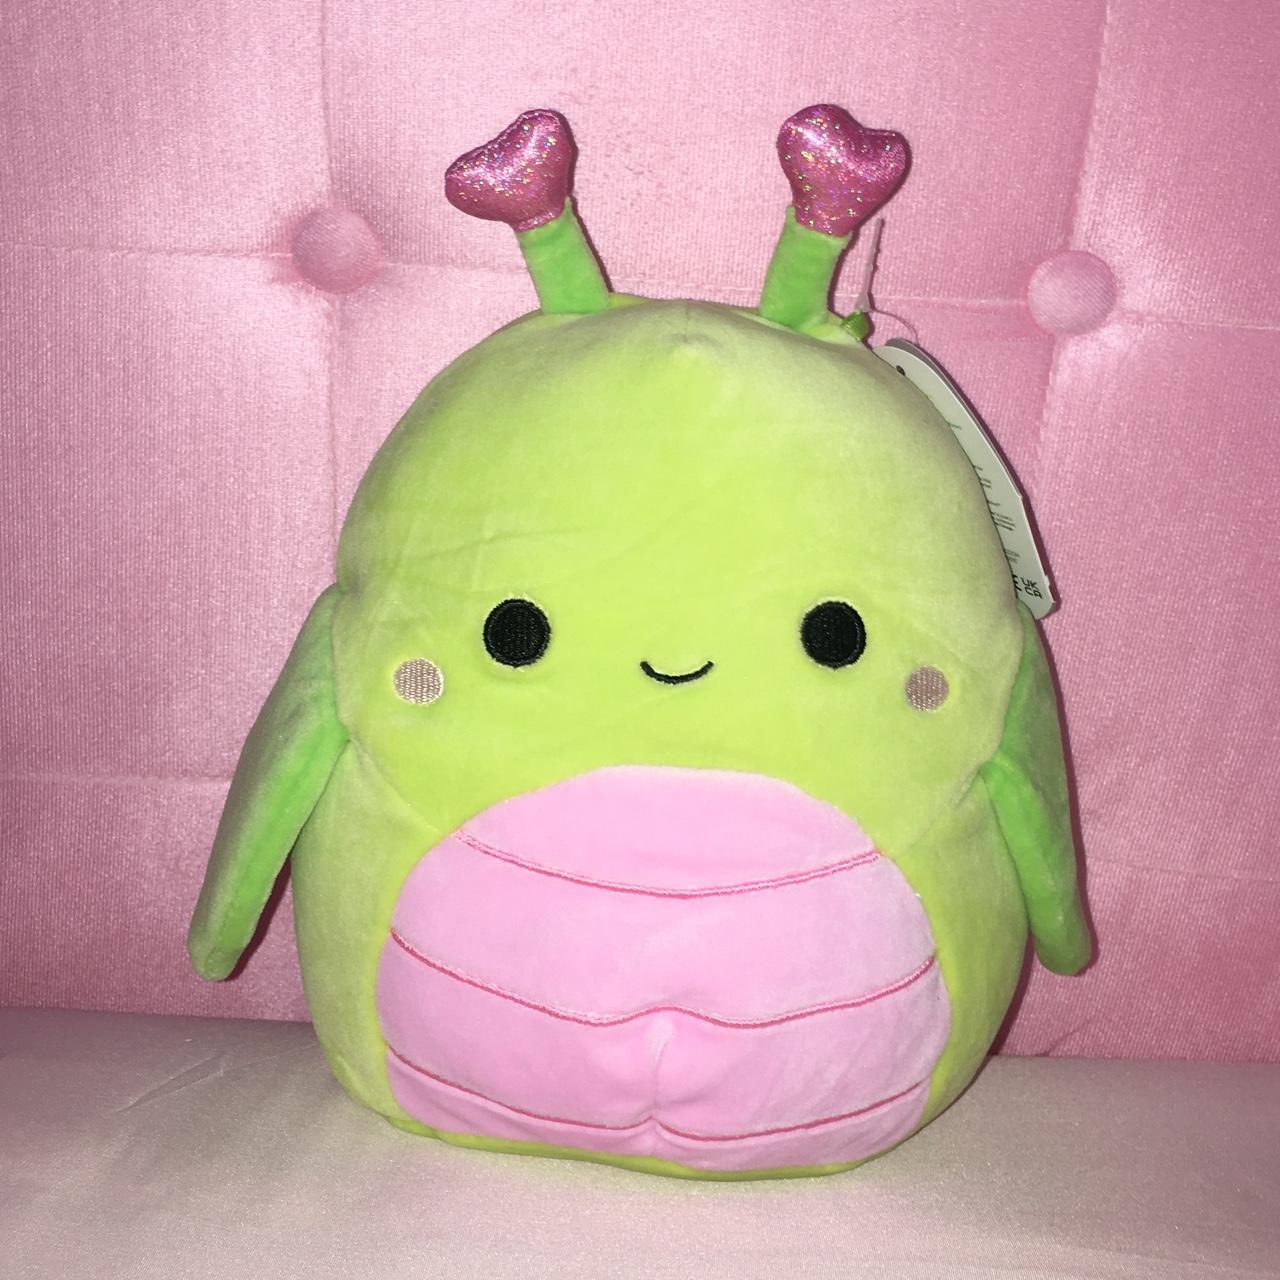 Squishmallows Green and Pink Stuffed-animals